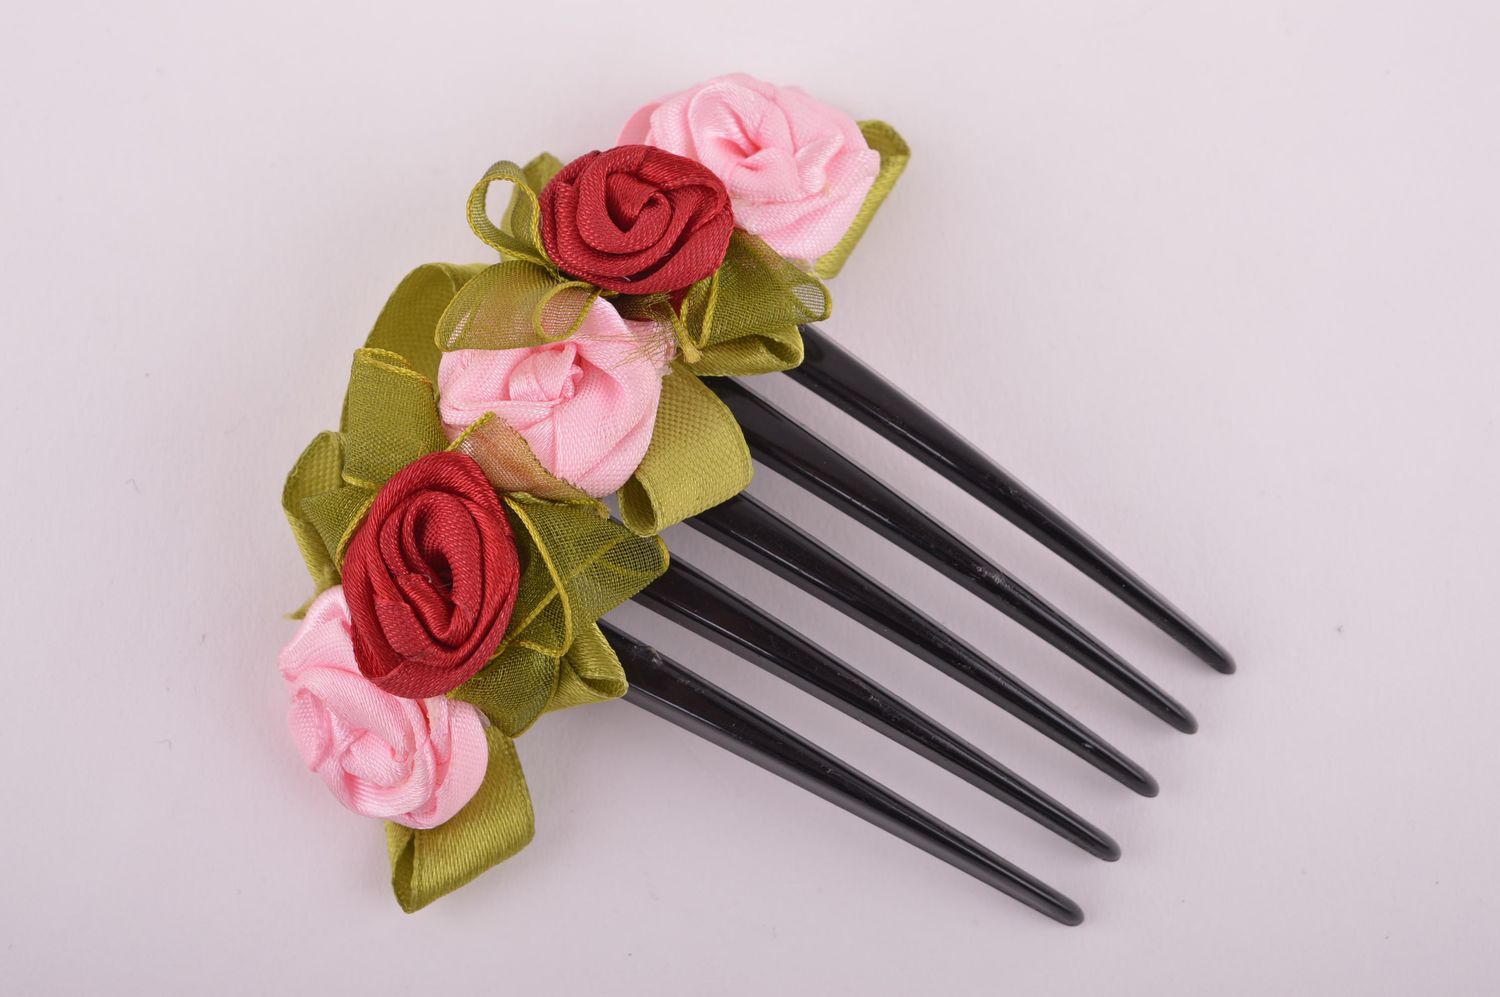 Handmade hair accessory comb for hair design jewelry women present gift for girl photo 2